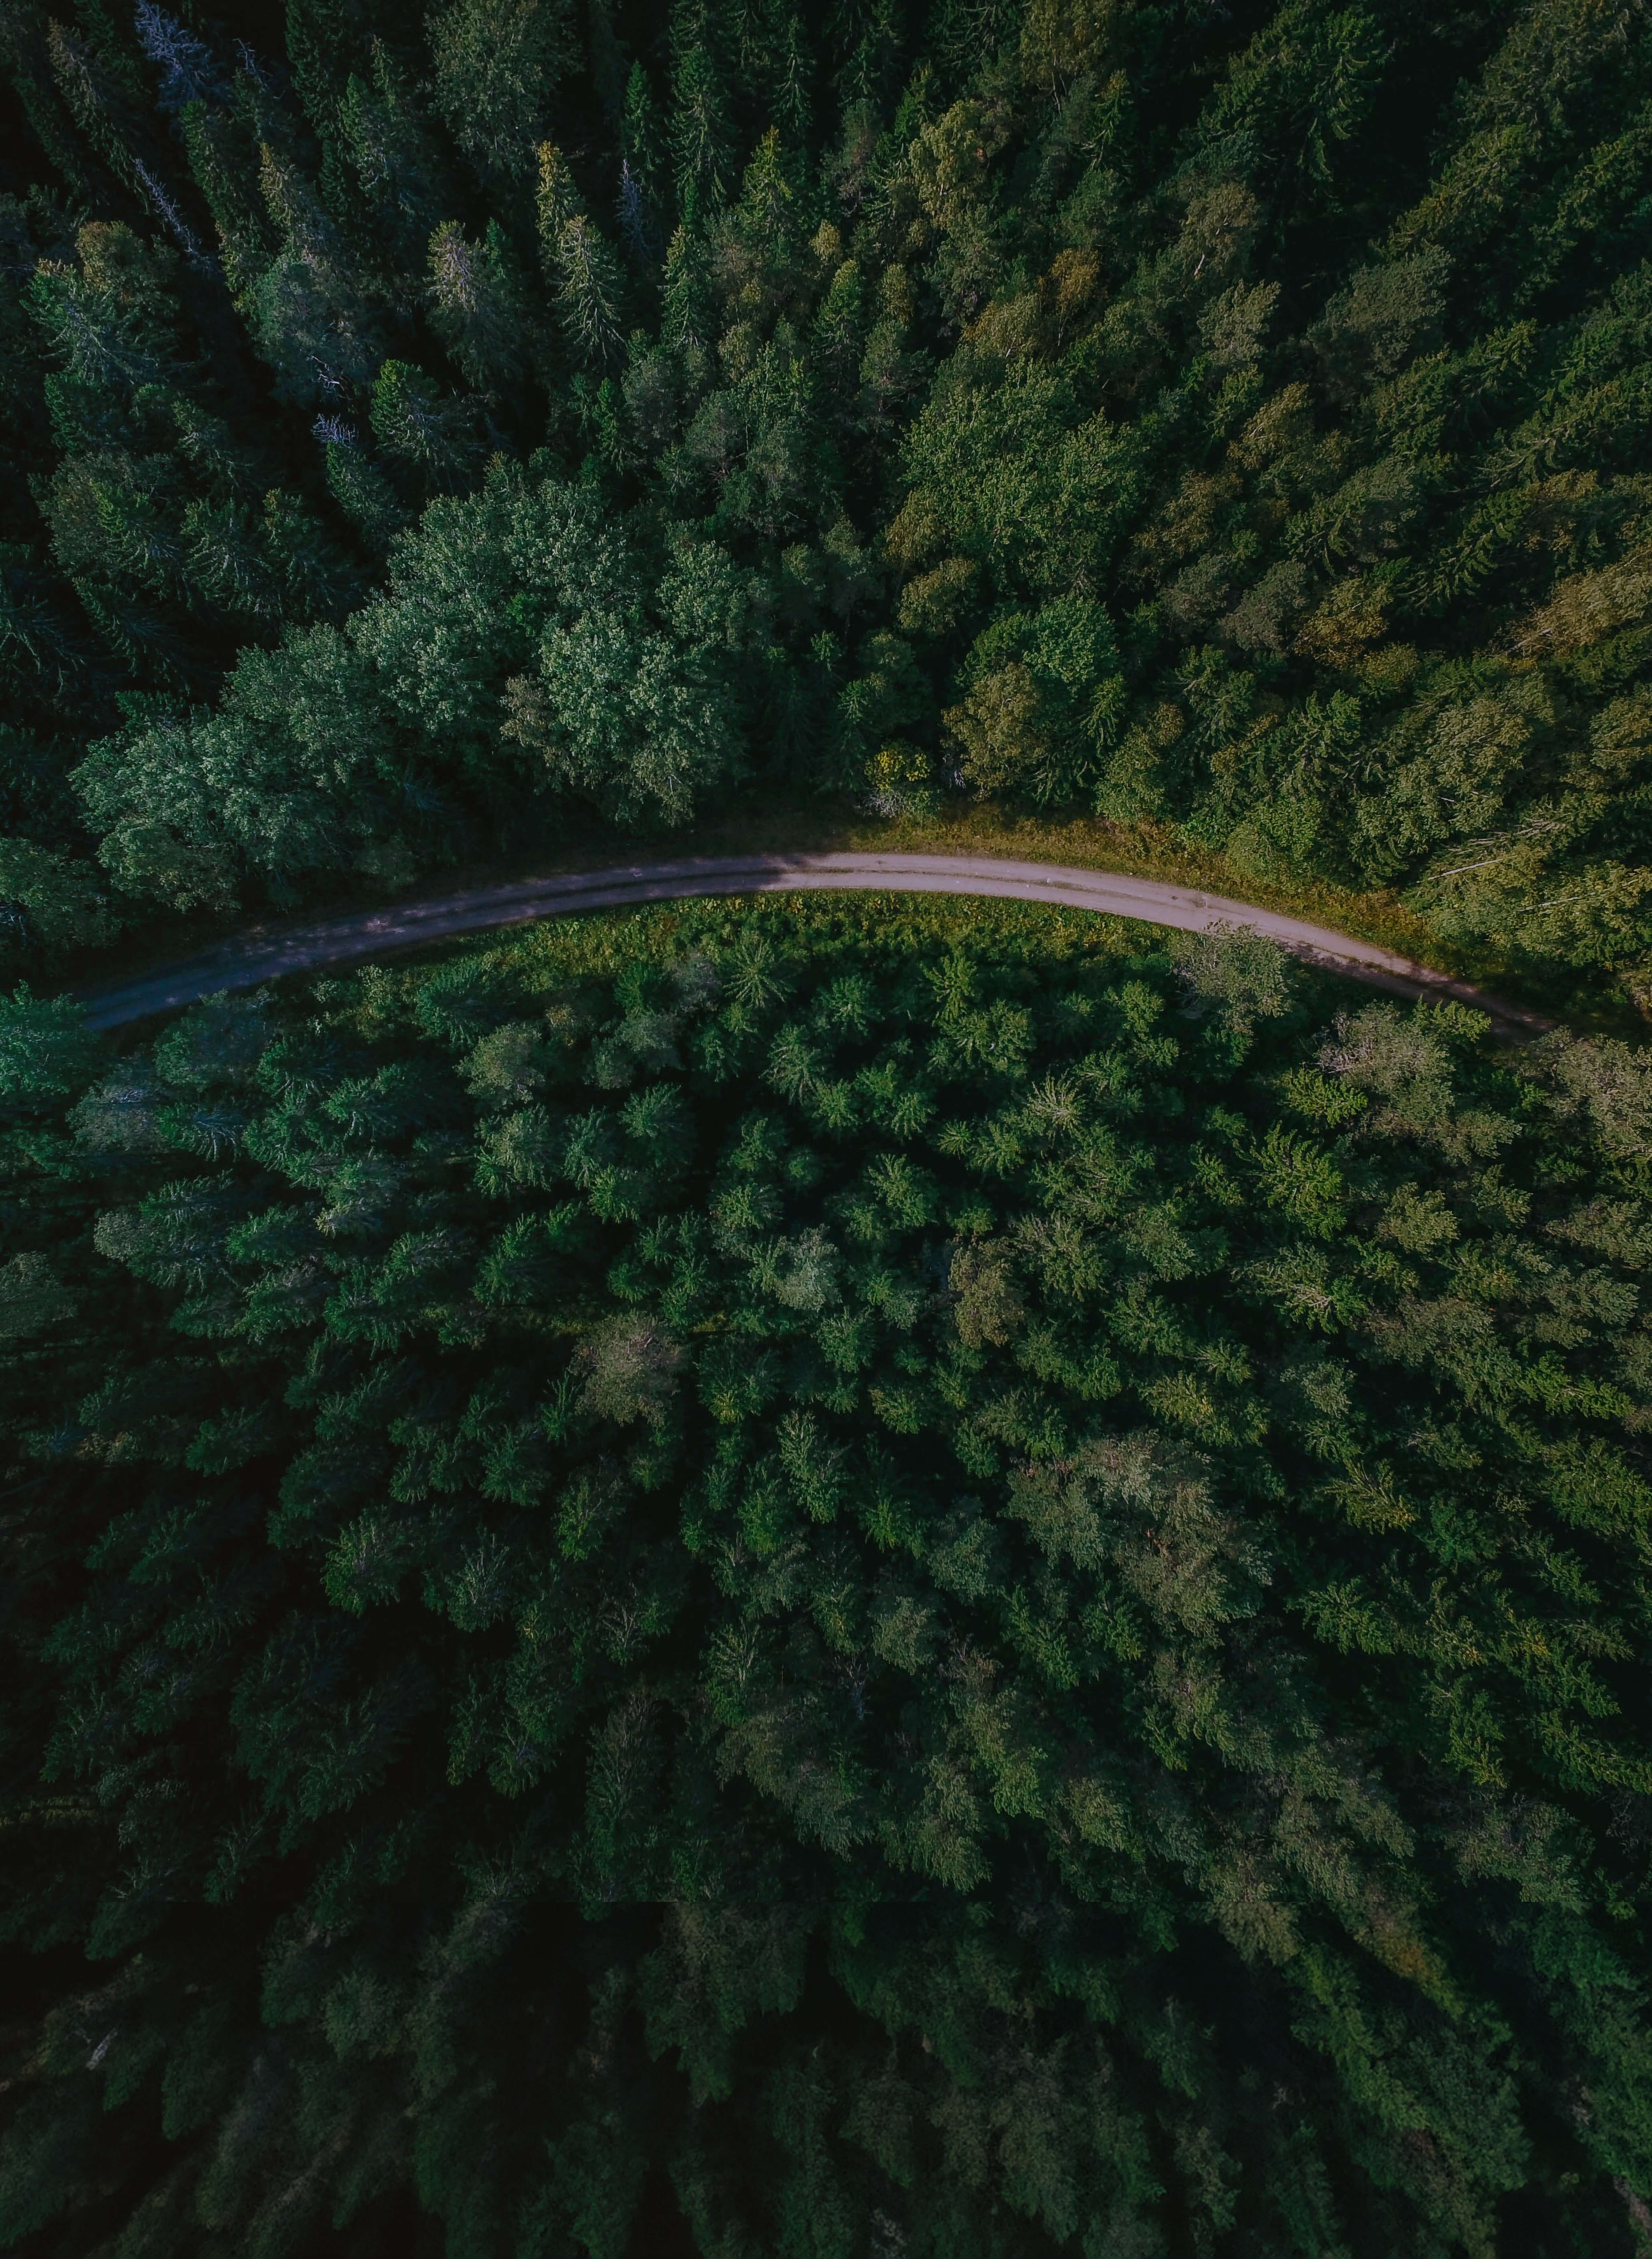 An aerial photo of a winding road surrounded by pine forests.